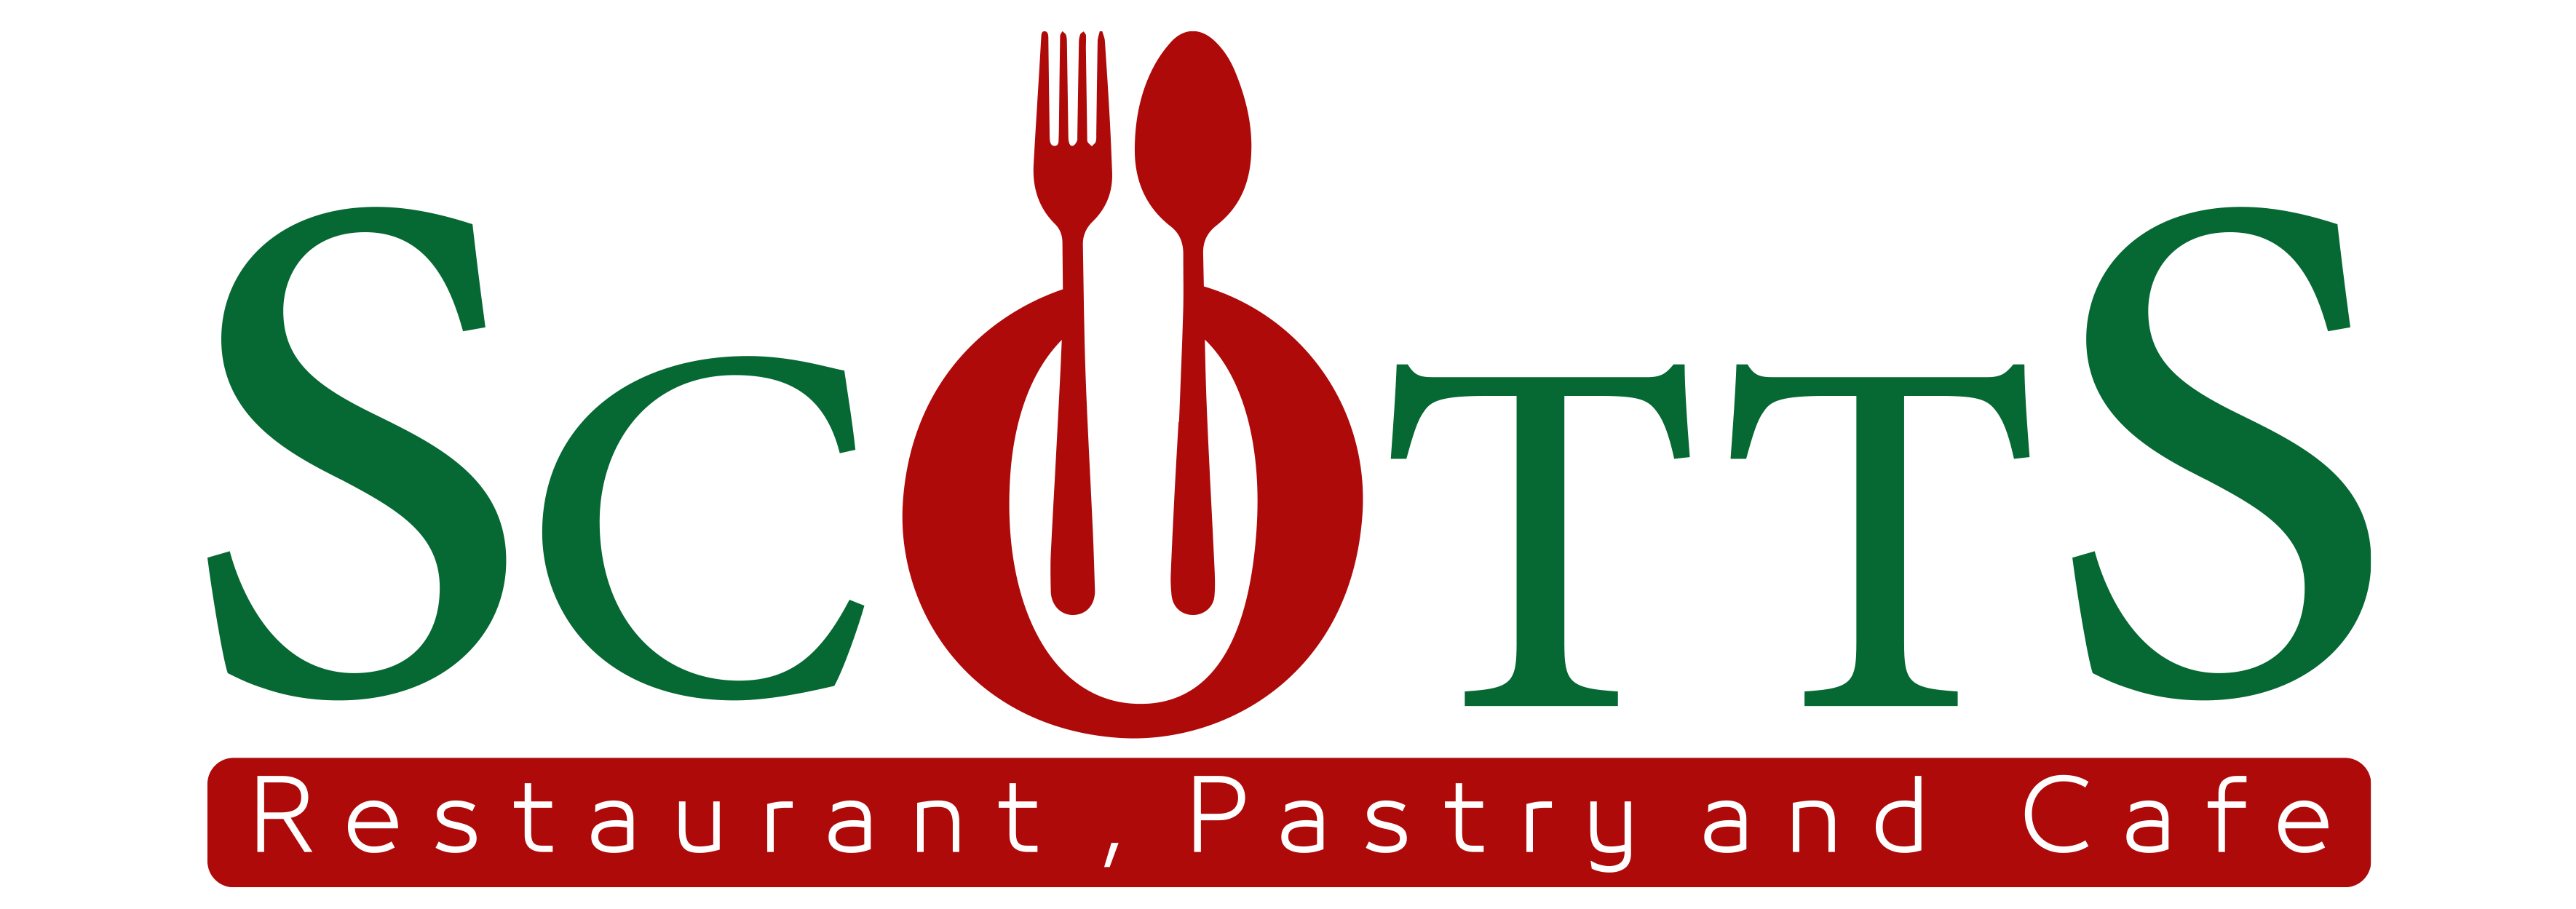 Scotts Restaurant and Cafe